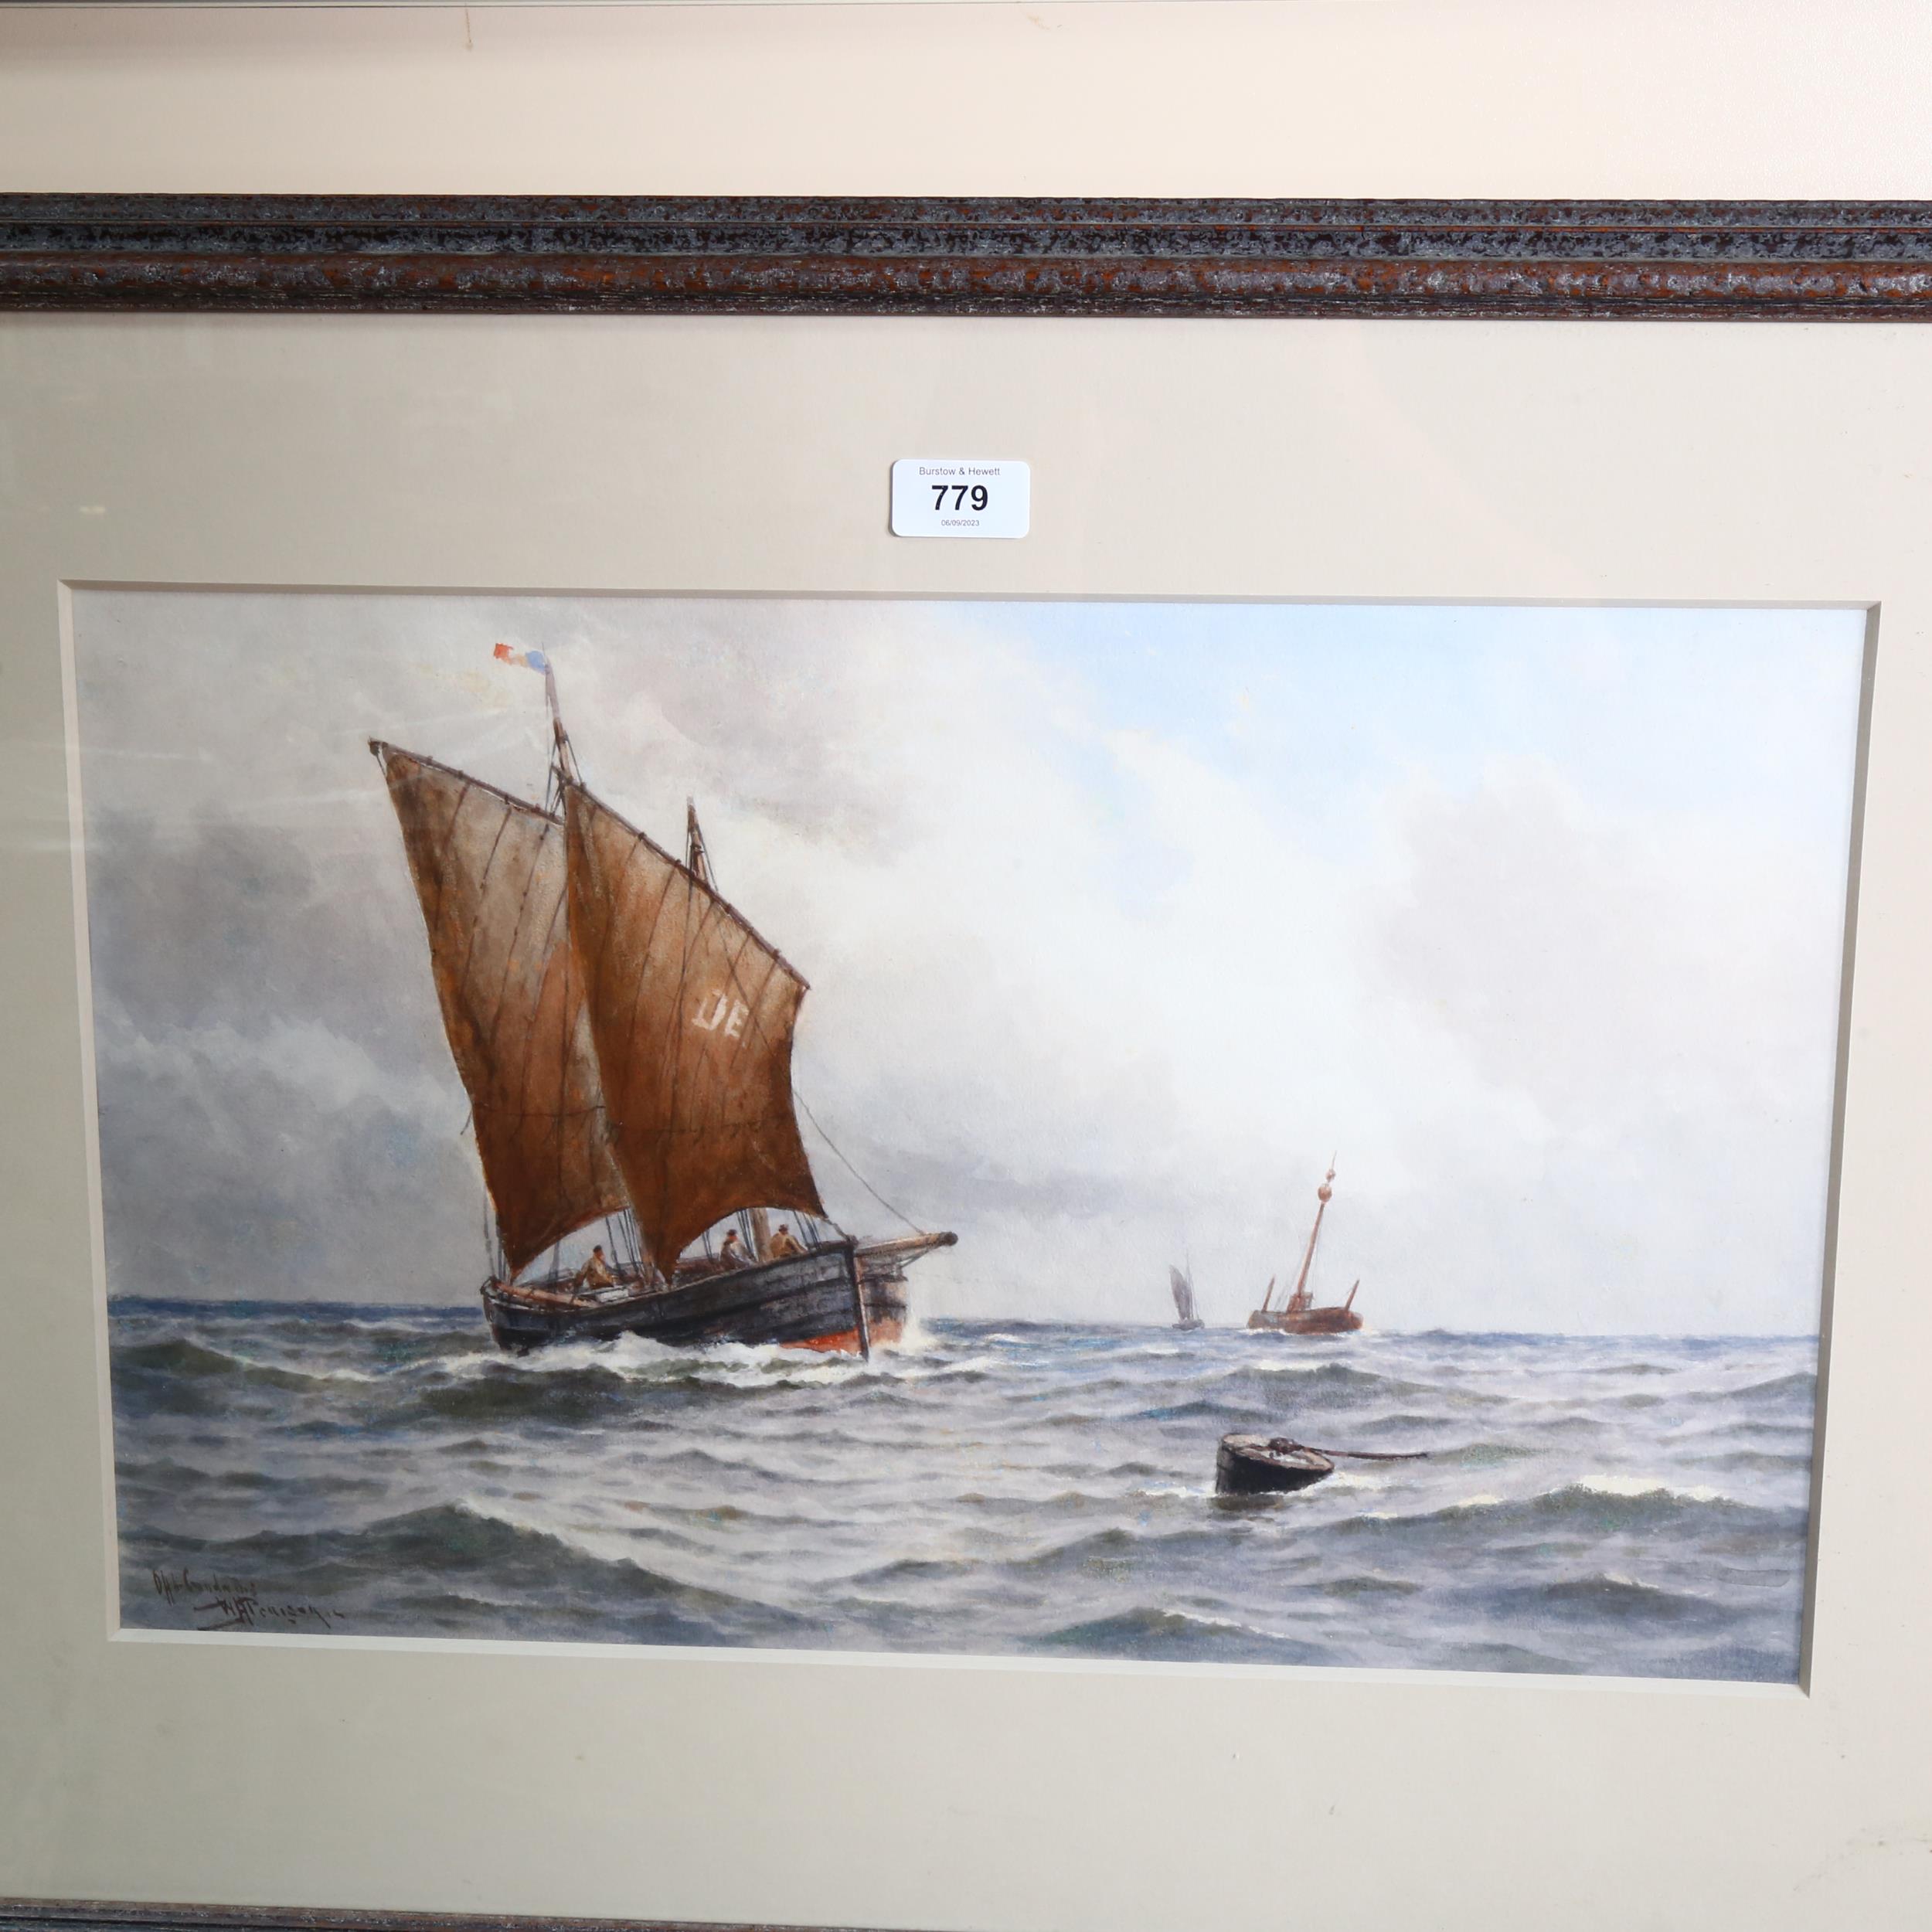 W H Tierney, watercolour, Dundee fishing boats off the coast, 55cm x 73cm overall, framed - Image 2 of 2